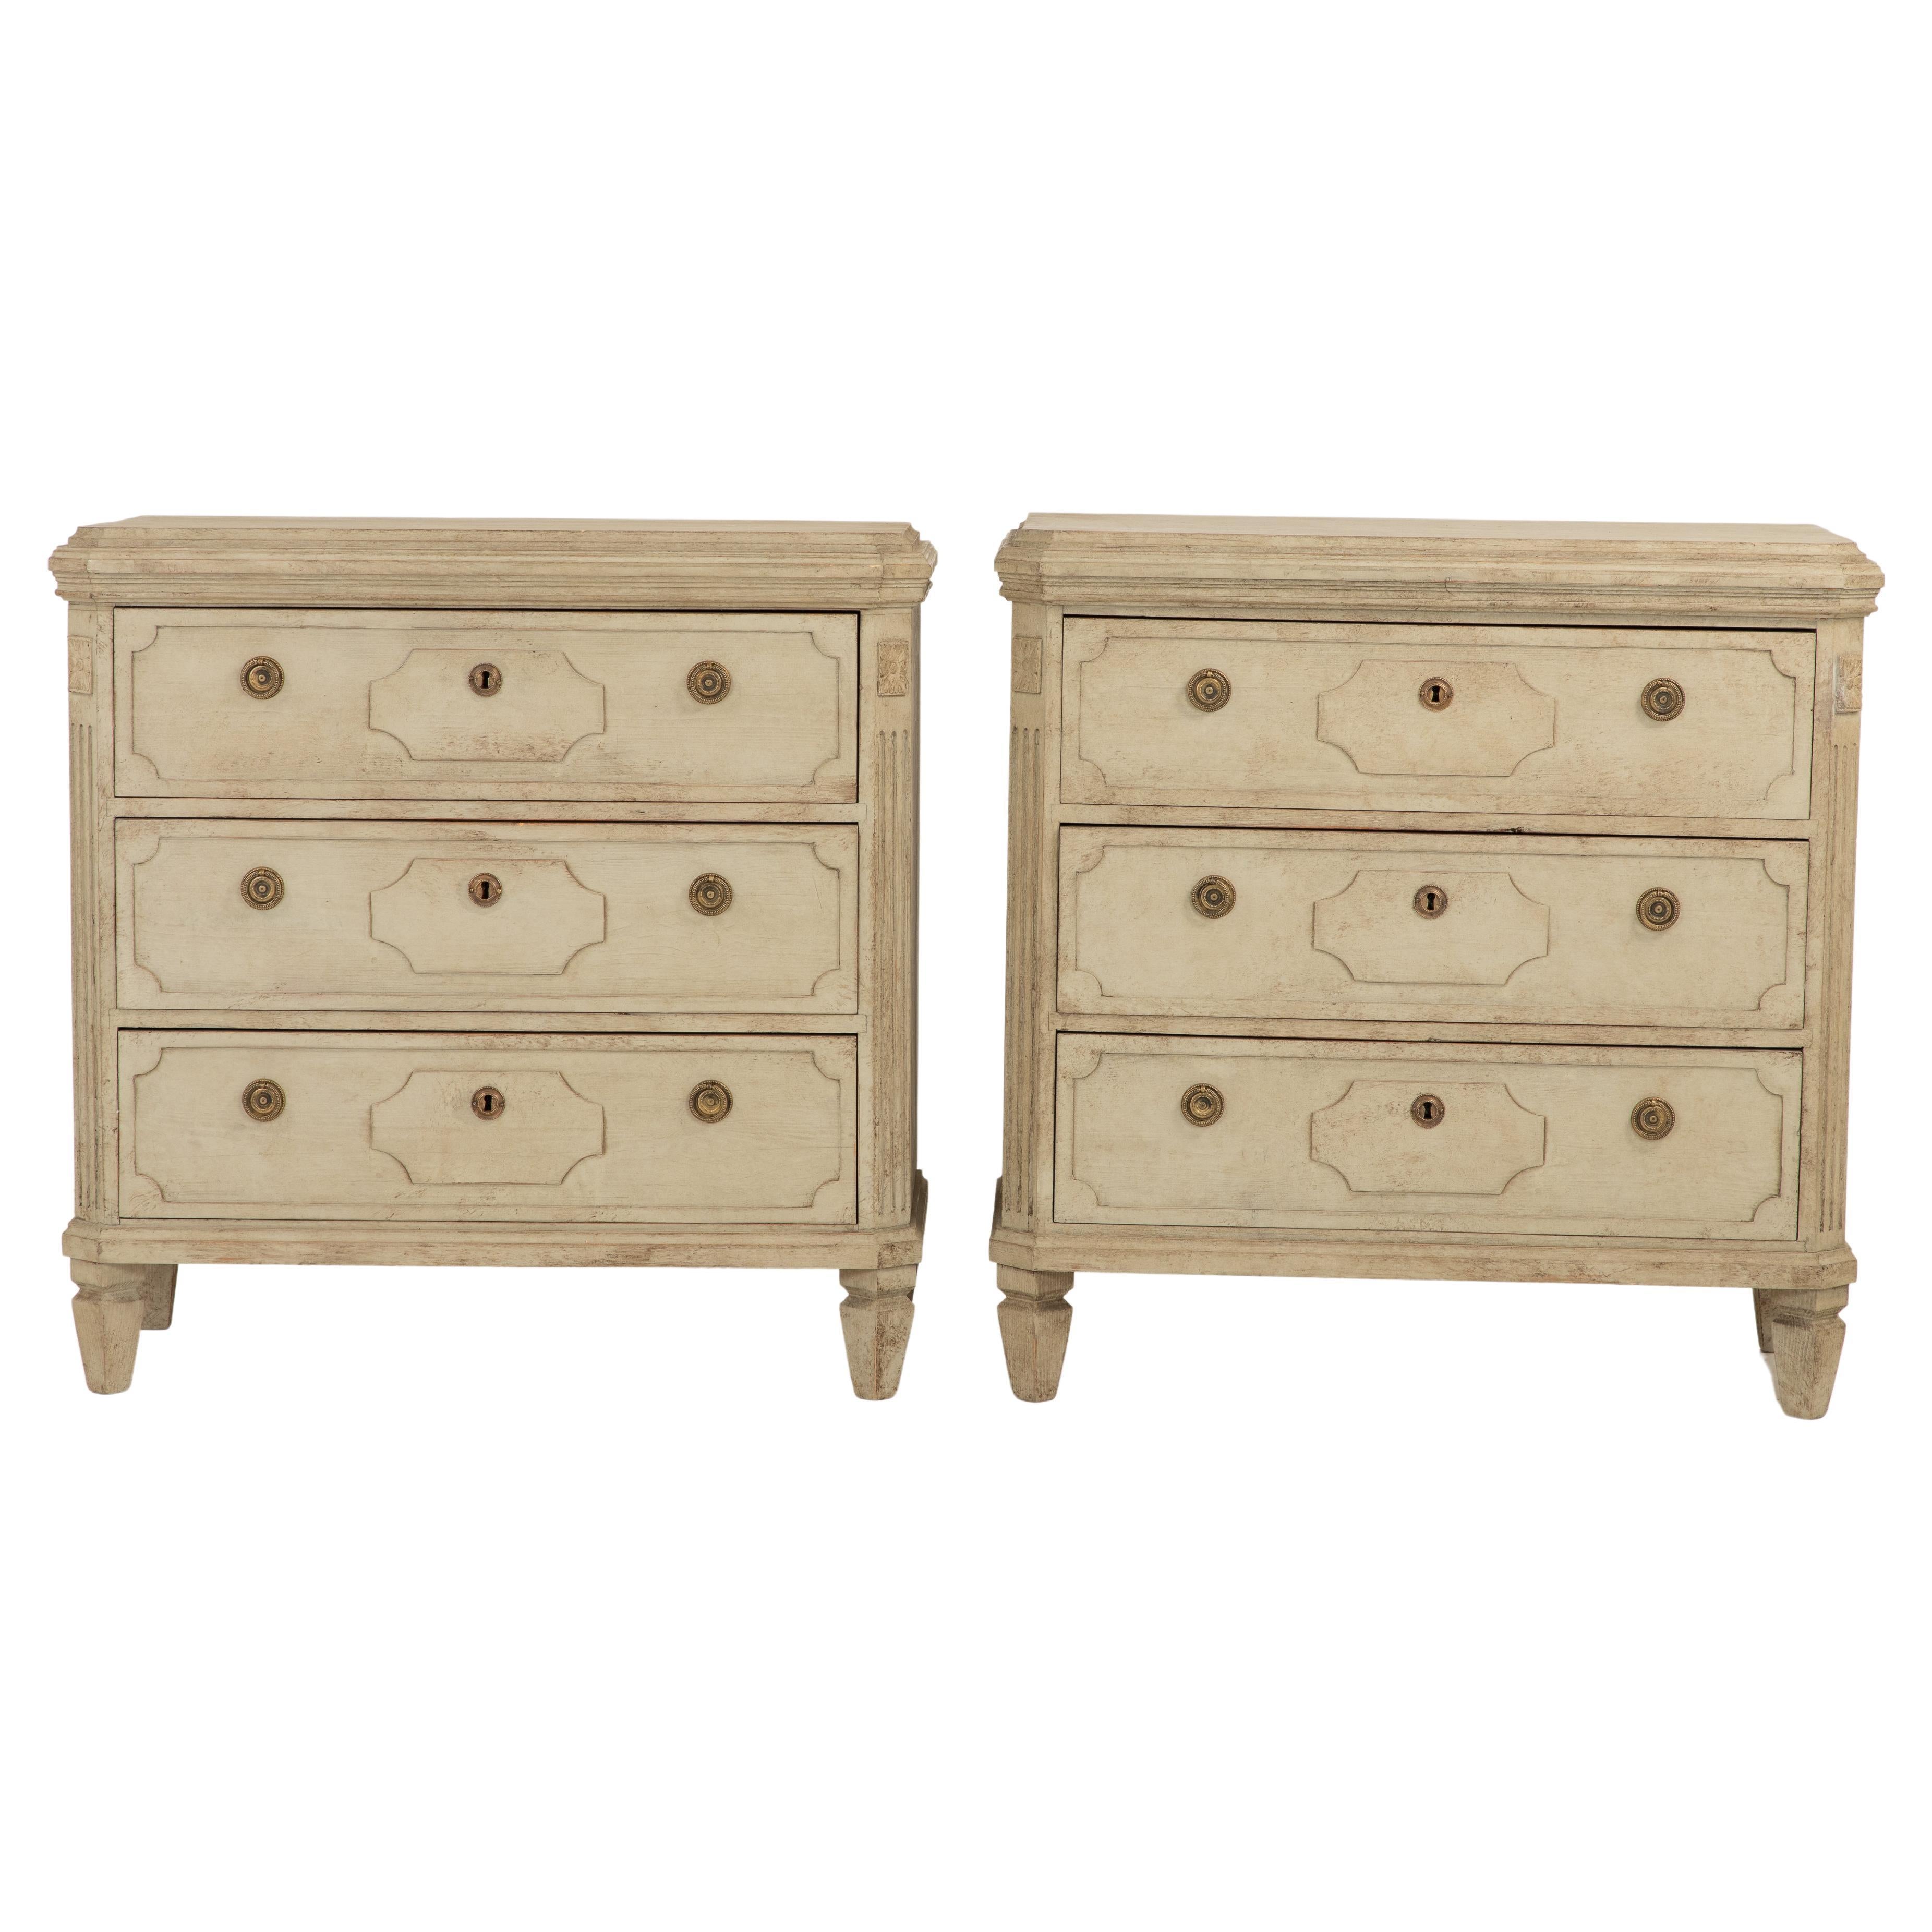 Antique Gustavian Style Chests of Drawers, a Pair For Sale